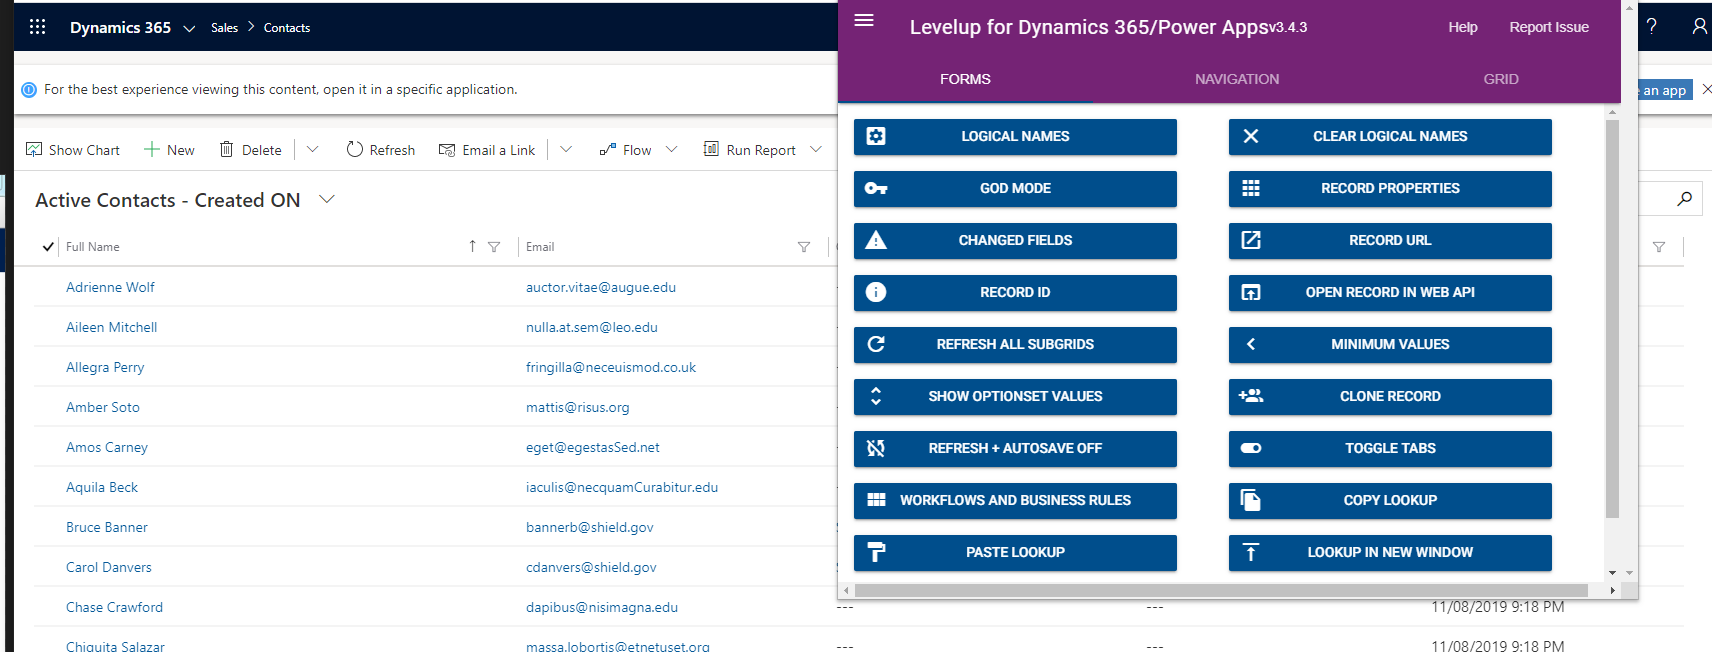 Level up for Dynamics 365/Power Apps